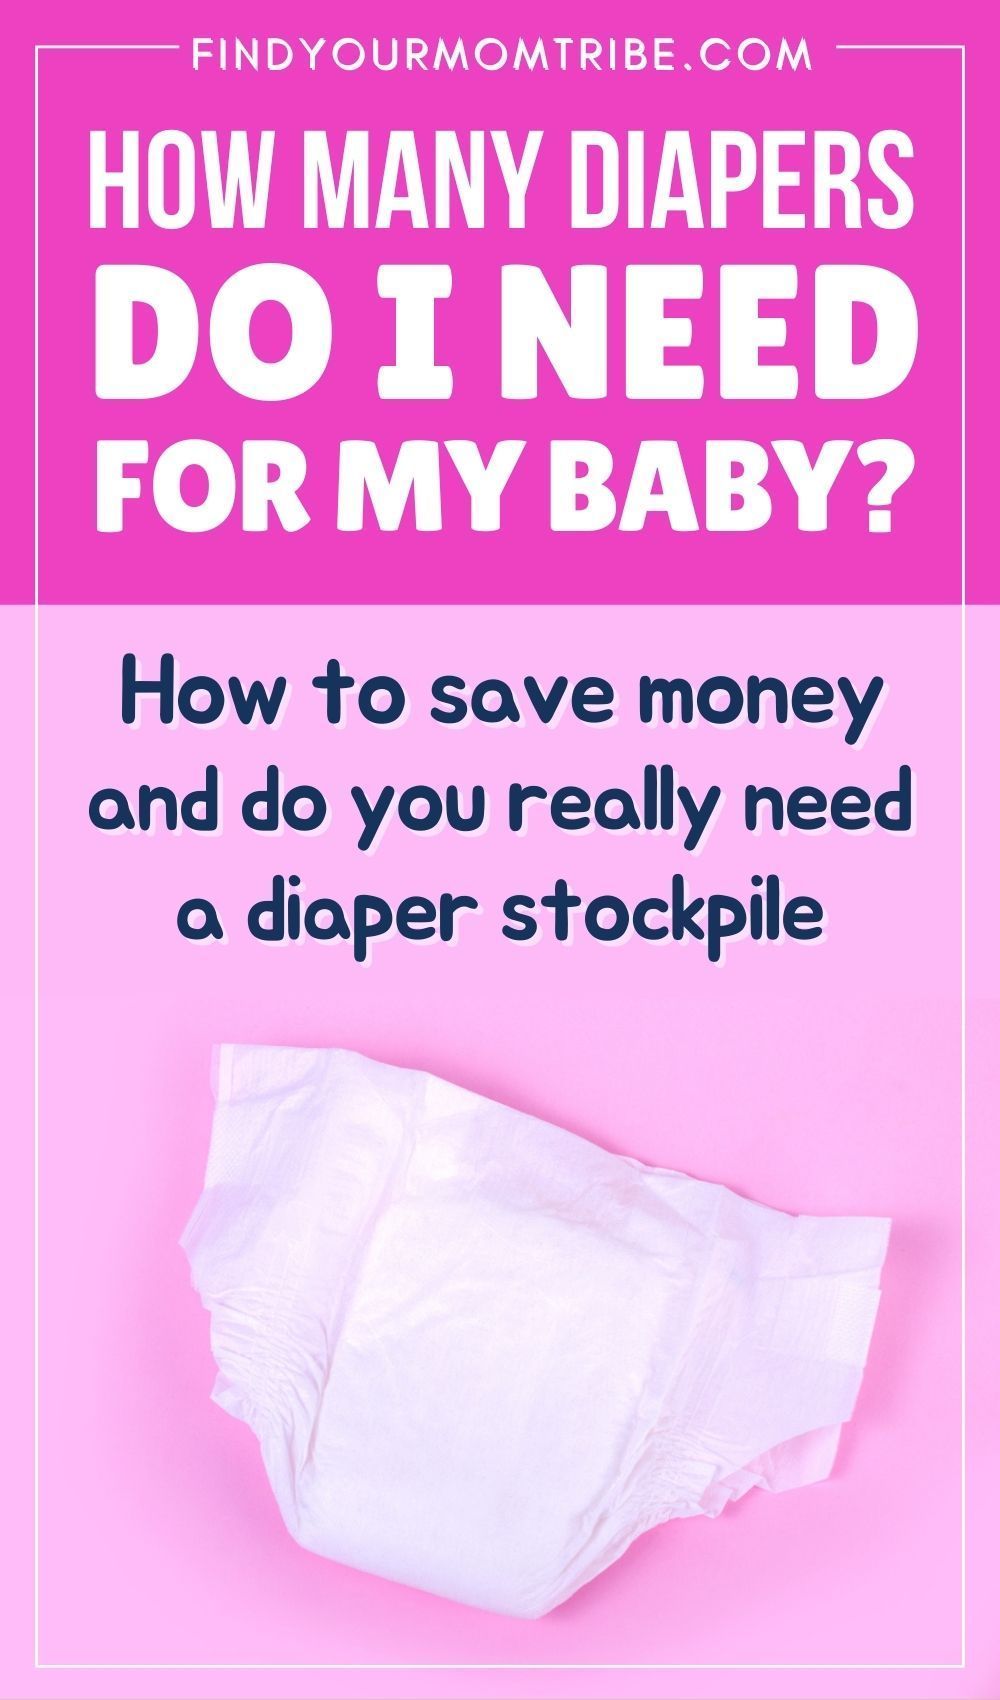 How Many Diapers Do I Need To Get For My Baby?